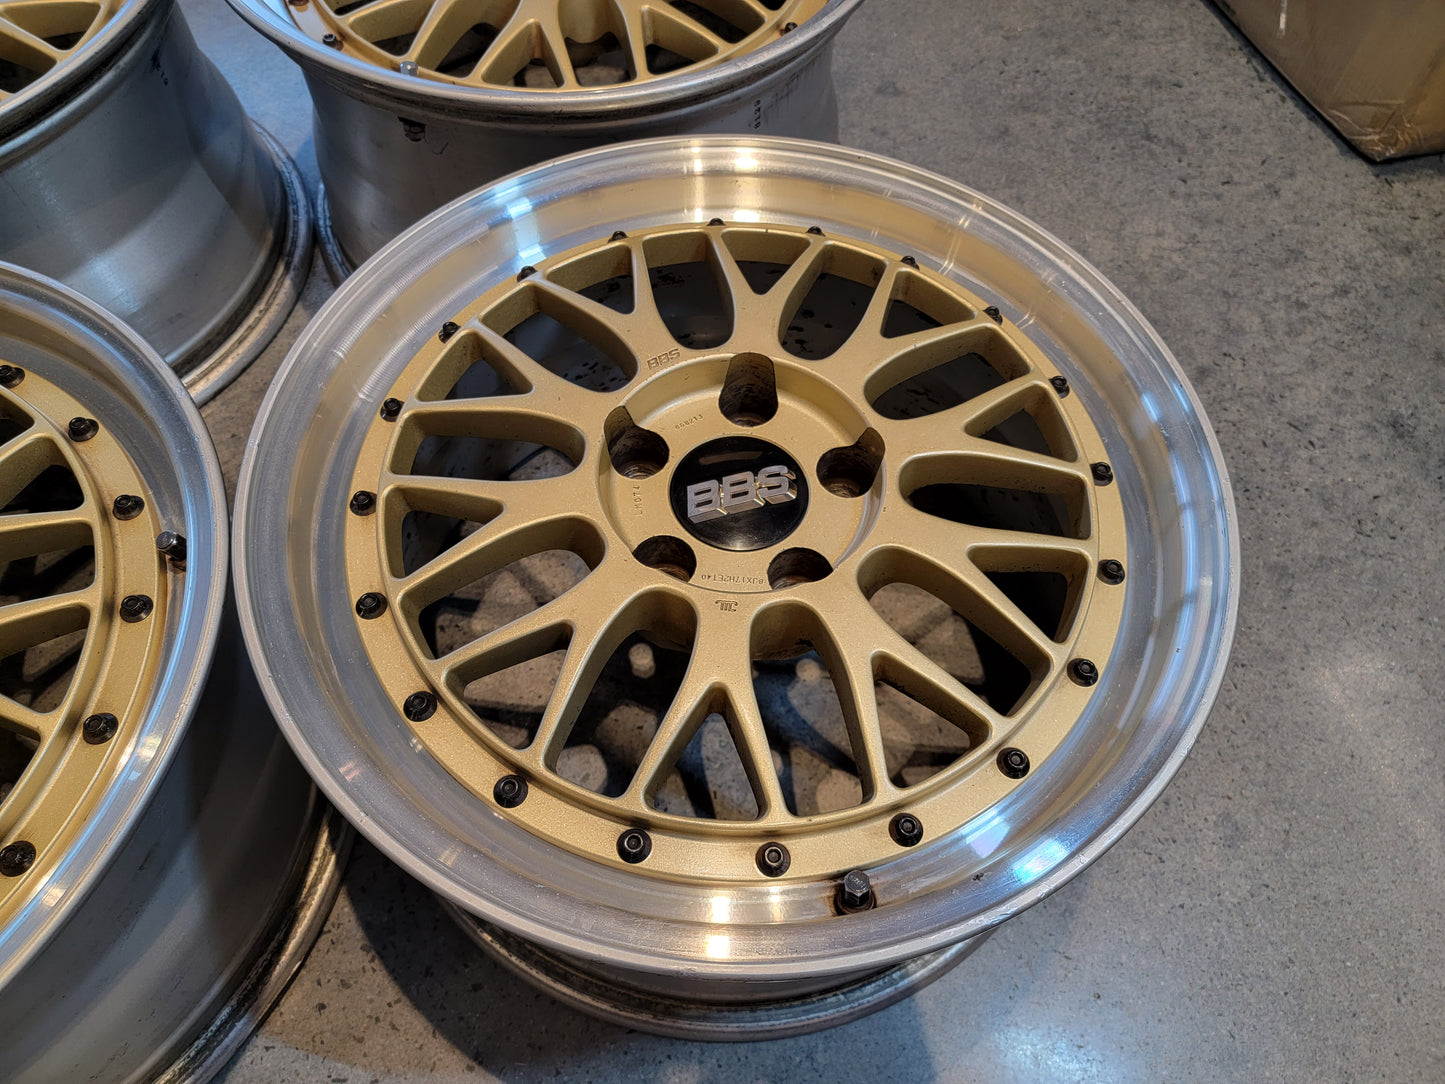 BBS LM 5X114.3 17x8 17x9 +40 LM075 LM074 Staggered Set of 4 Gold